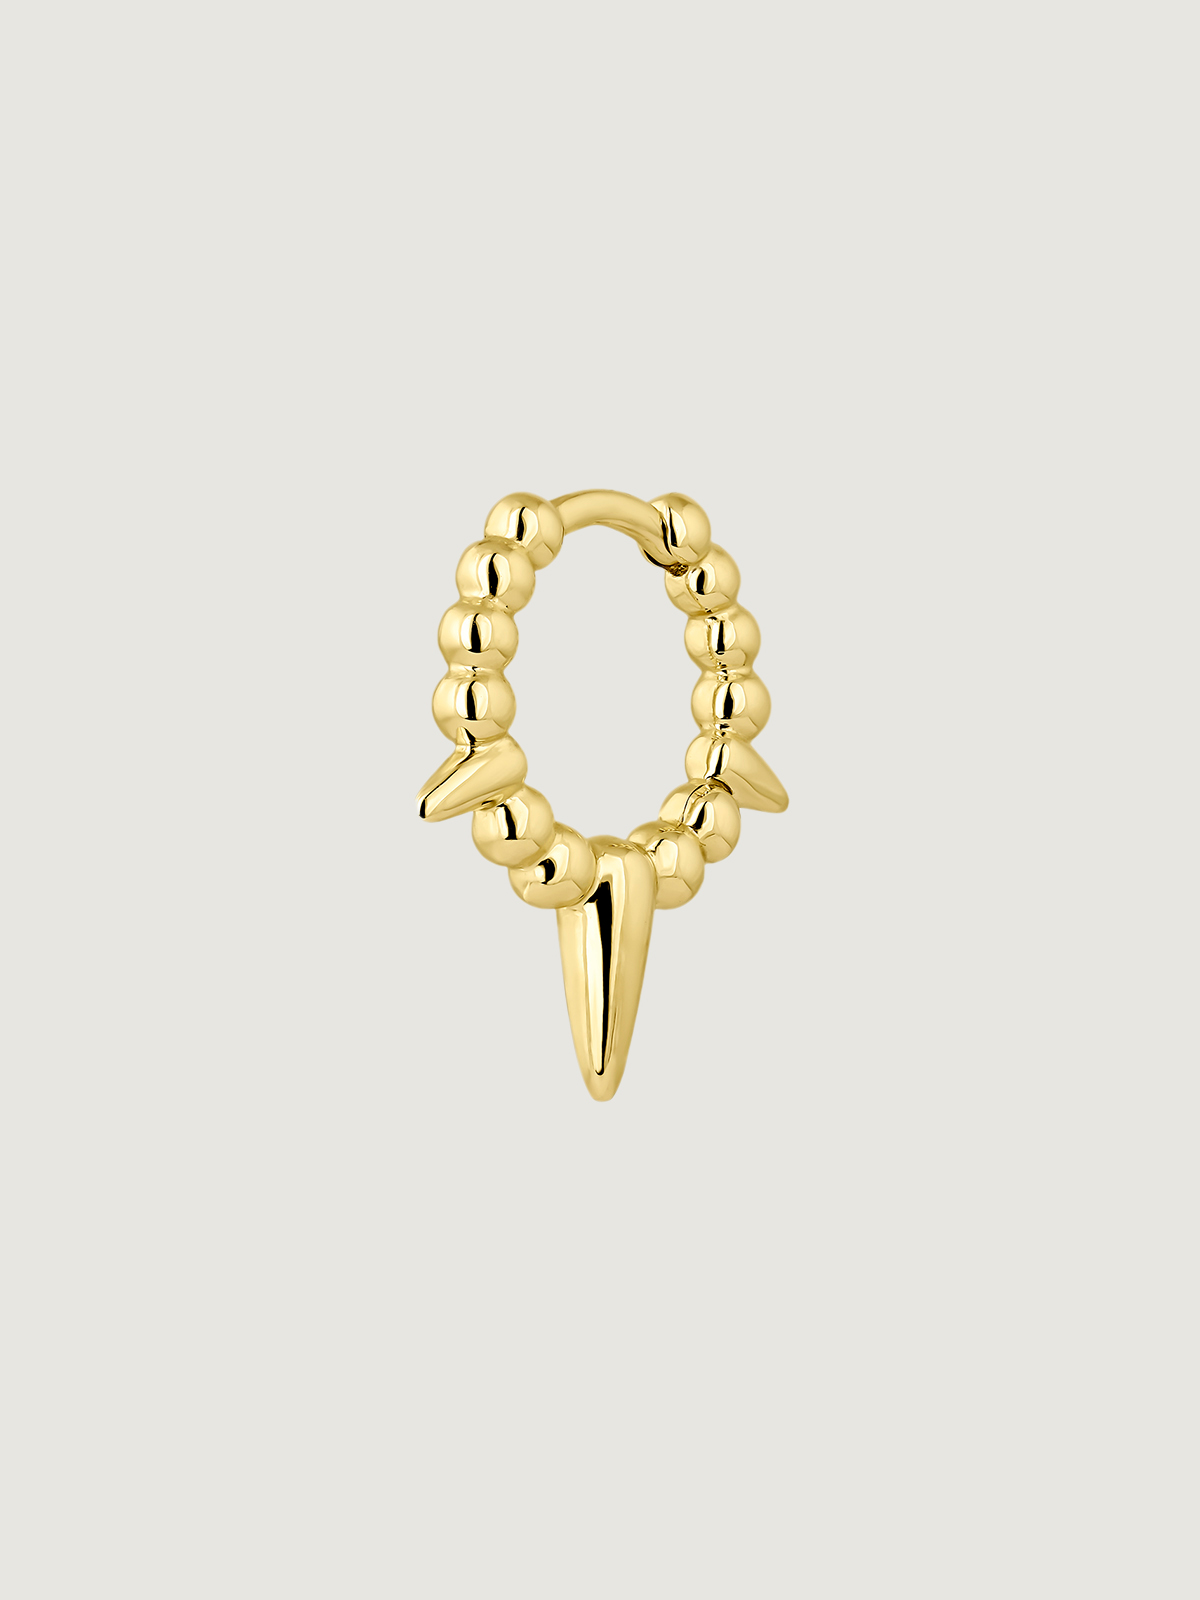 Individual 9K yellow gold earring with balls and spikes.